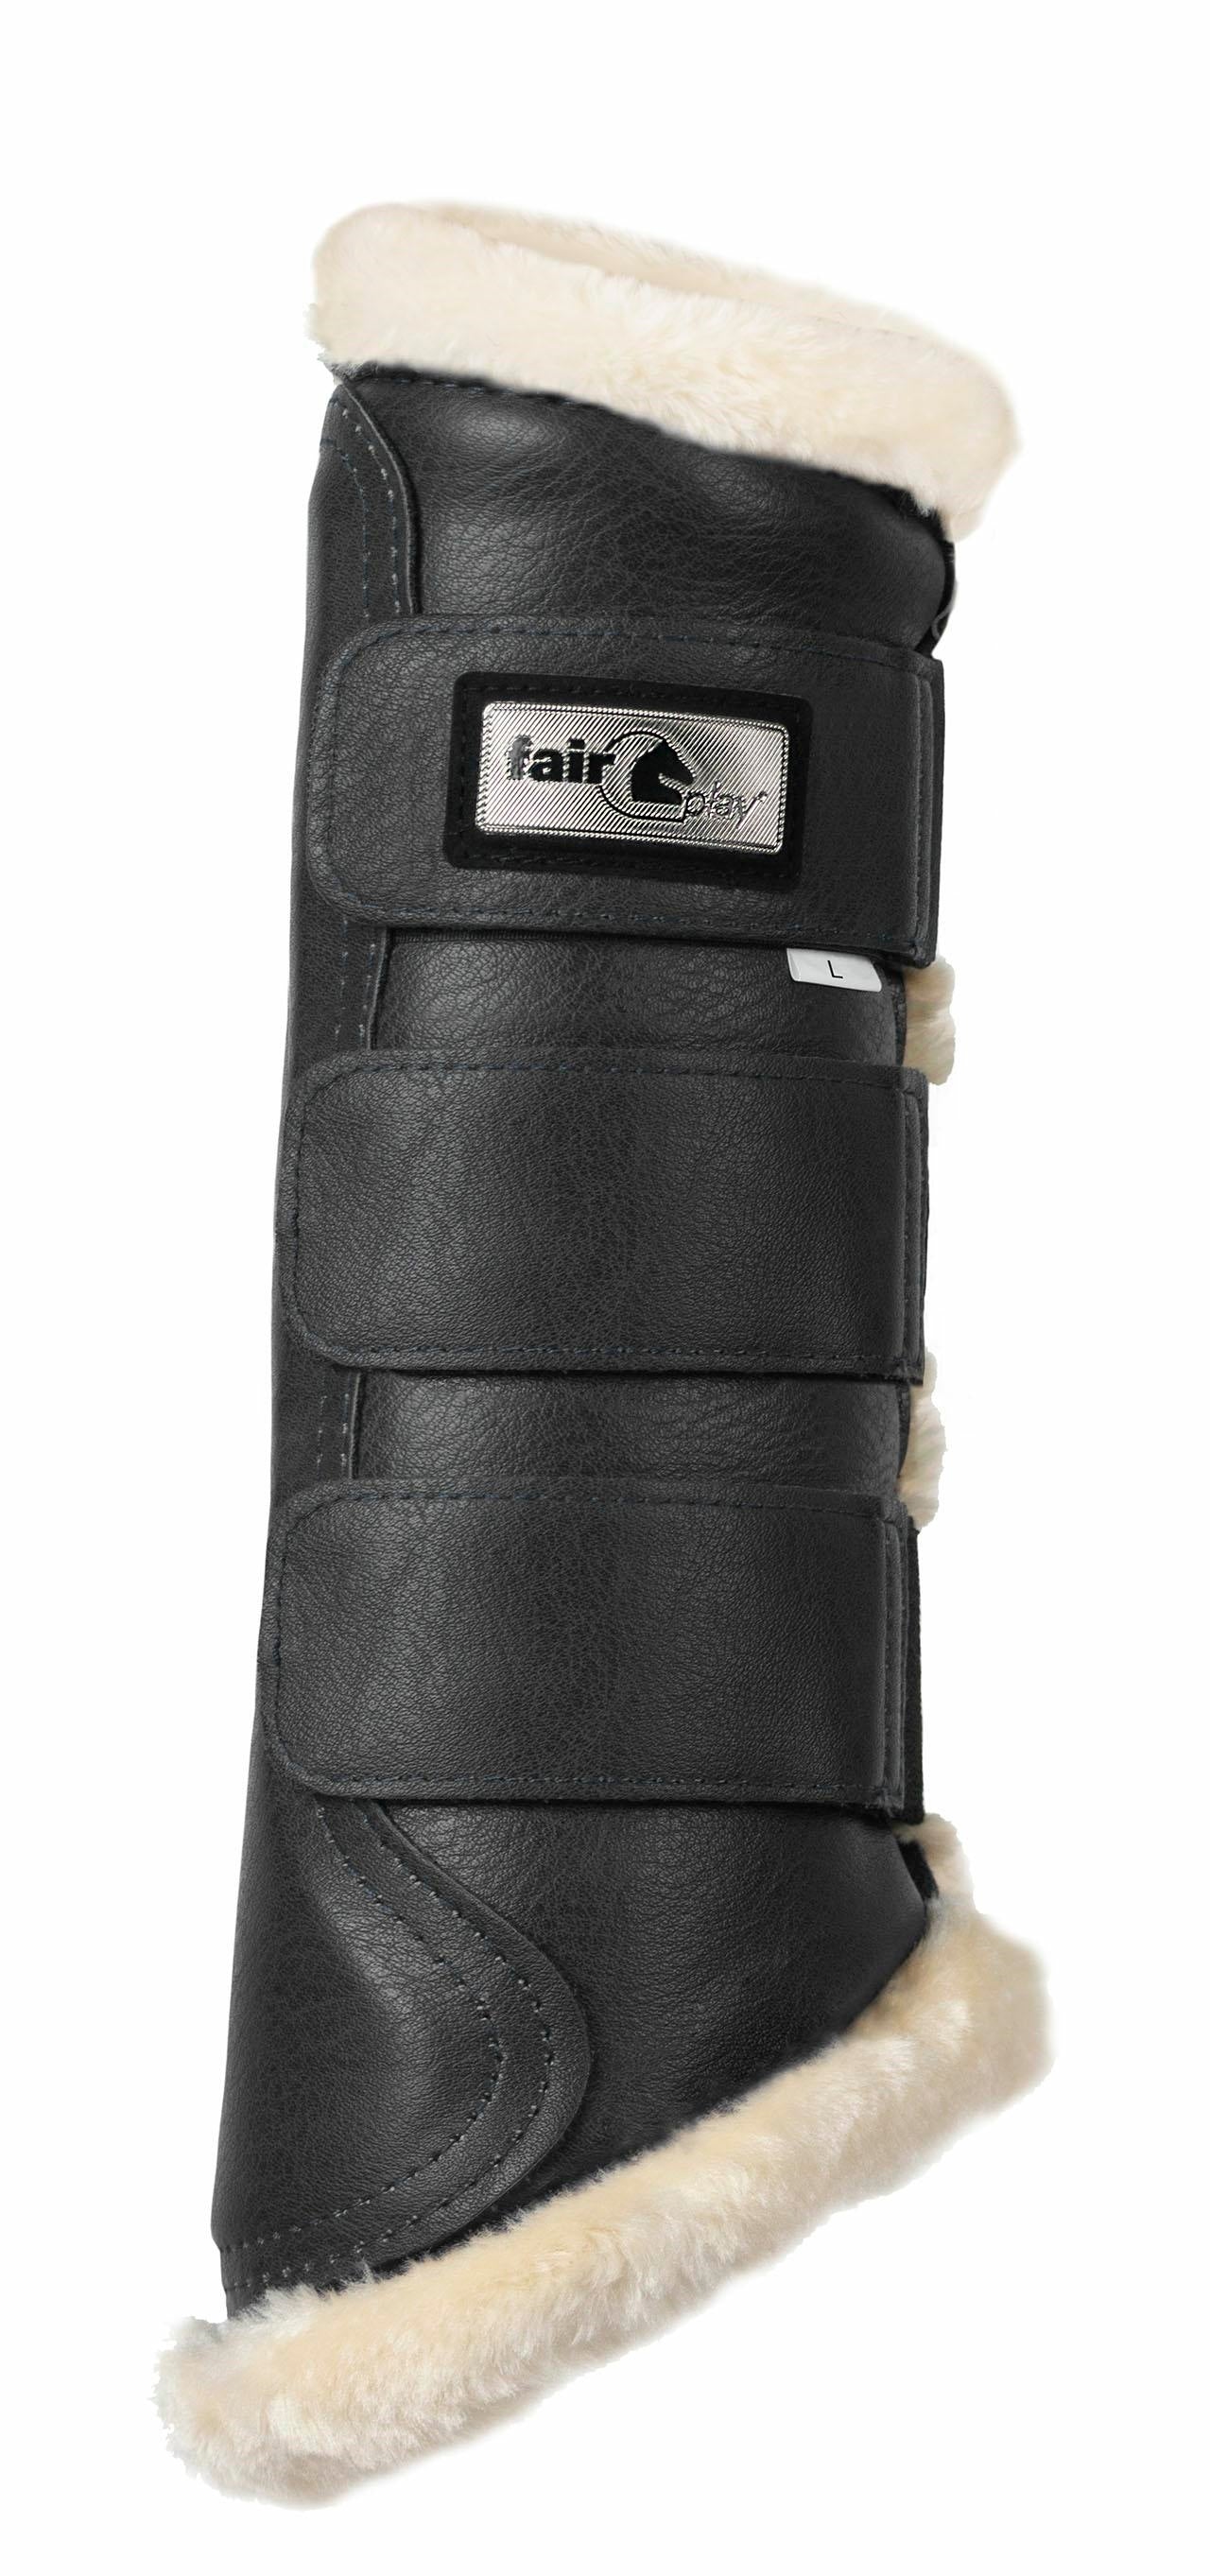 Fairplay Cadence Dressage Protection Boots